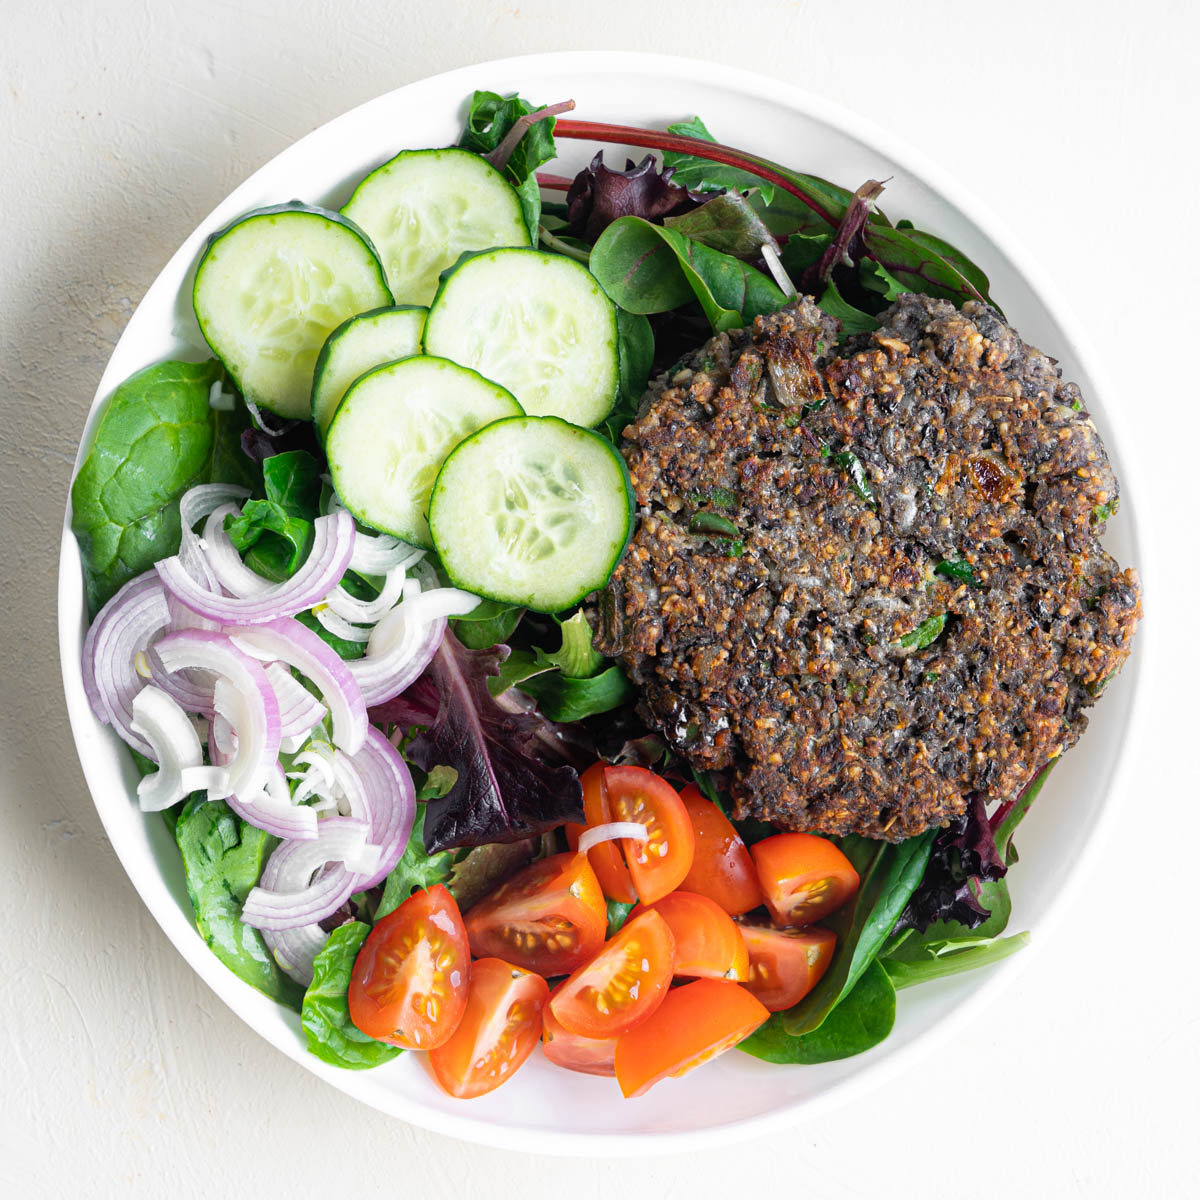 A large black bean burger patty laid overtop a spinach salad with cucumbers, shallots, and sliced cherry tomatoes.